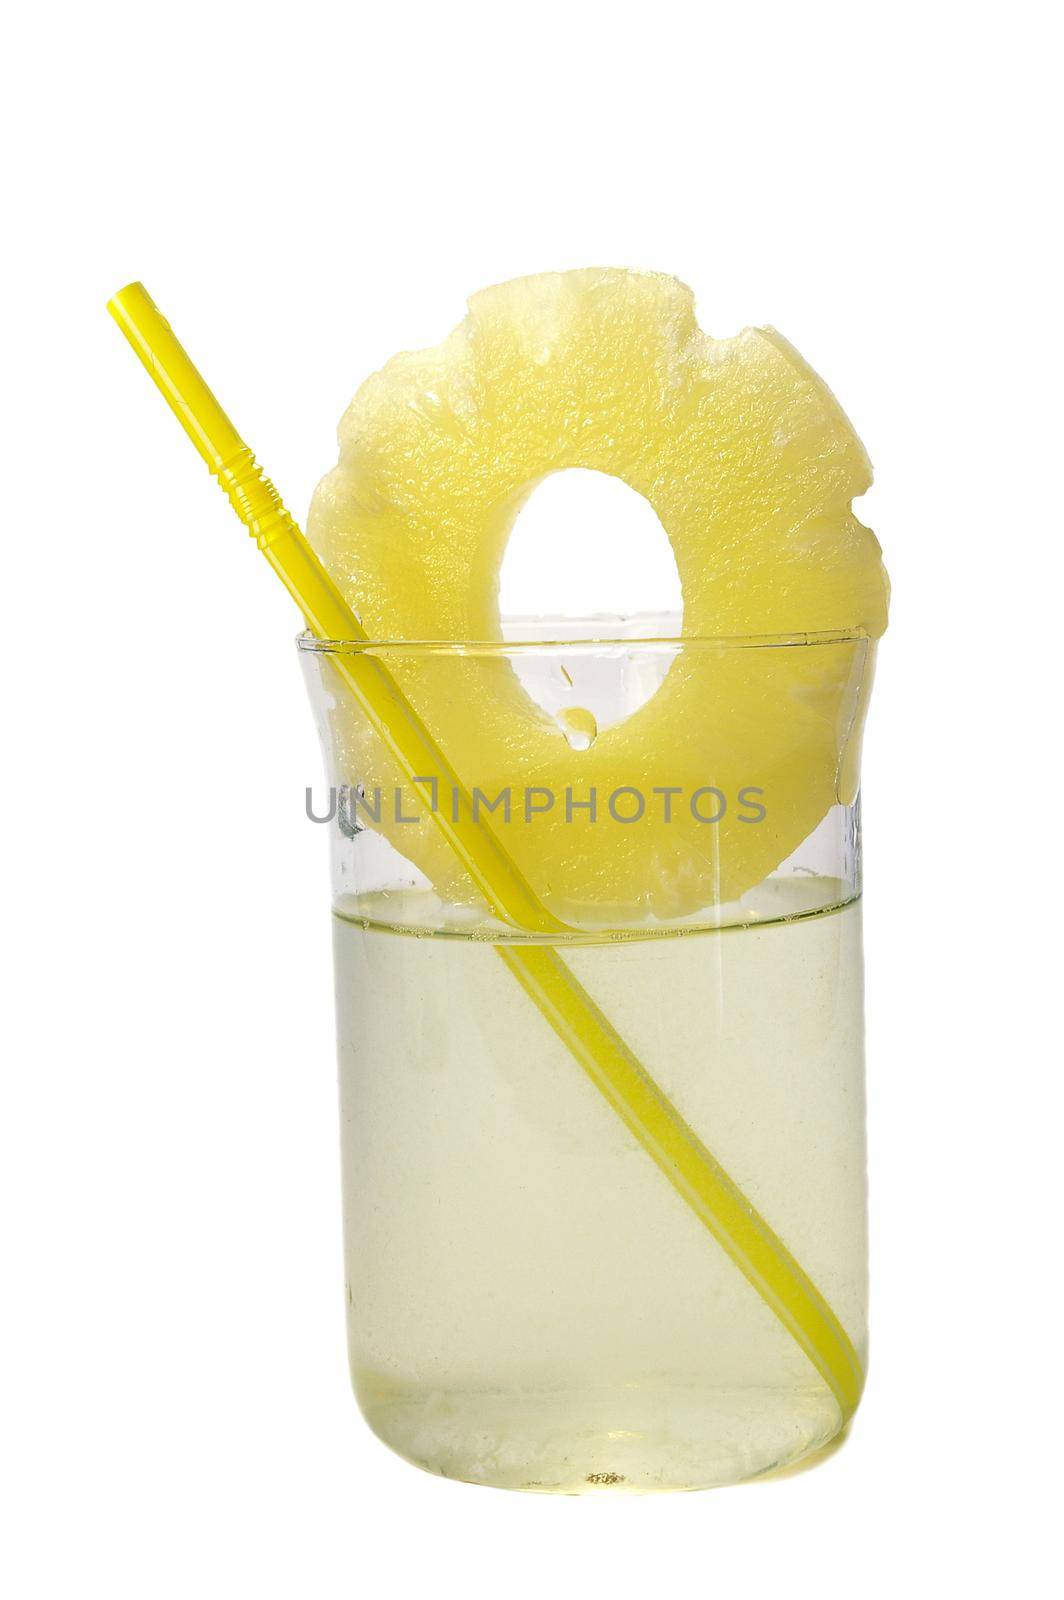 Pineapple juice in the glass on white background